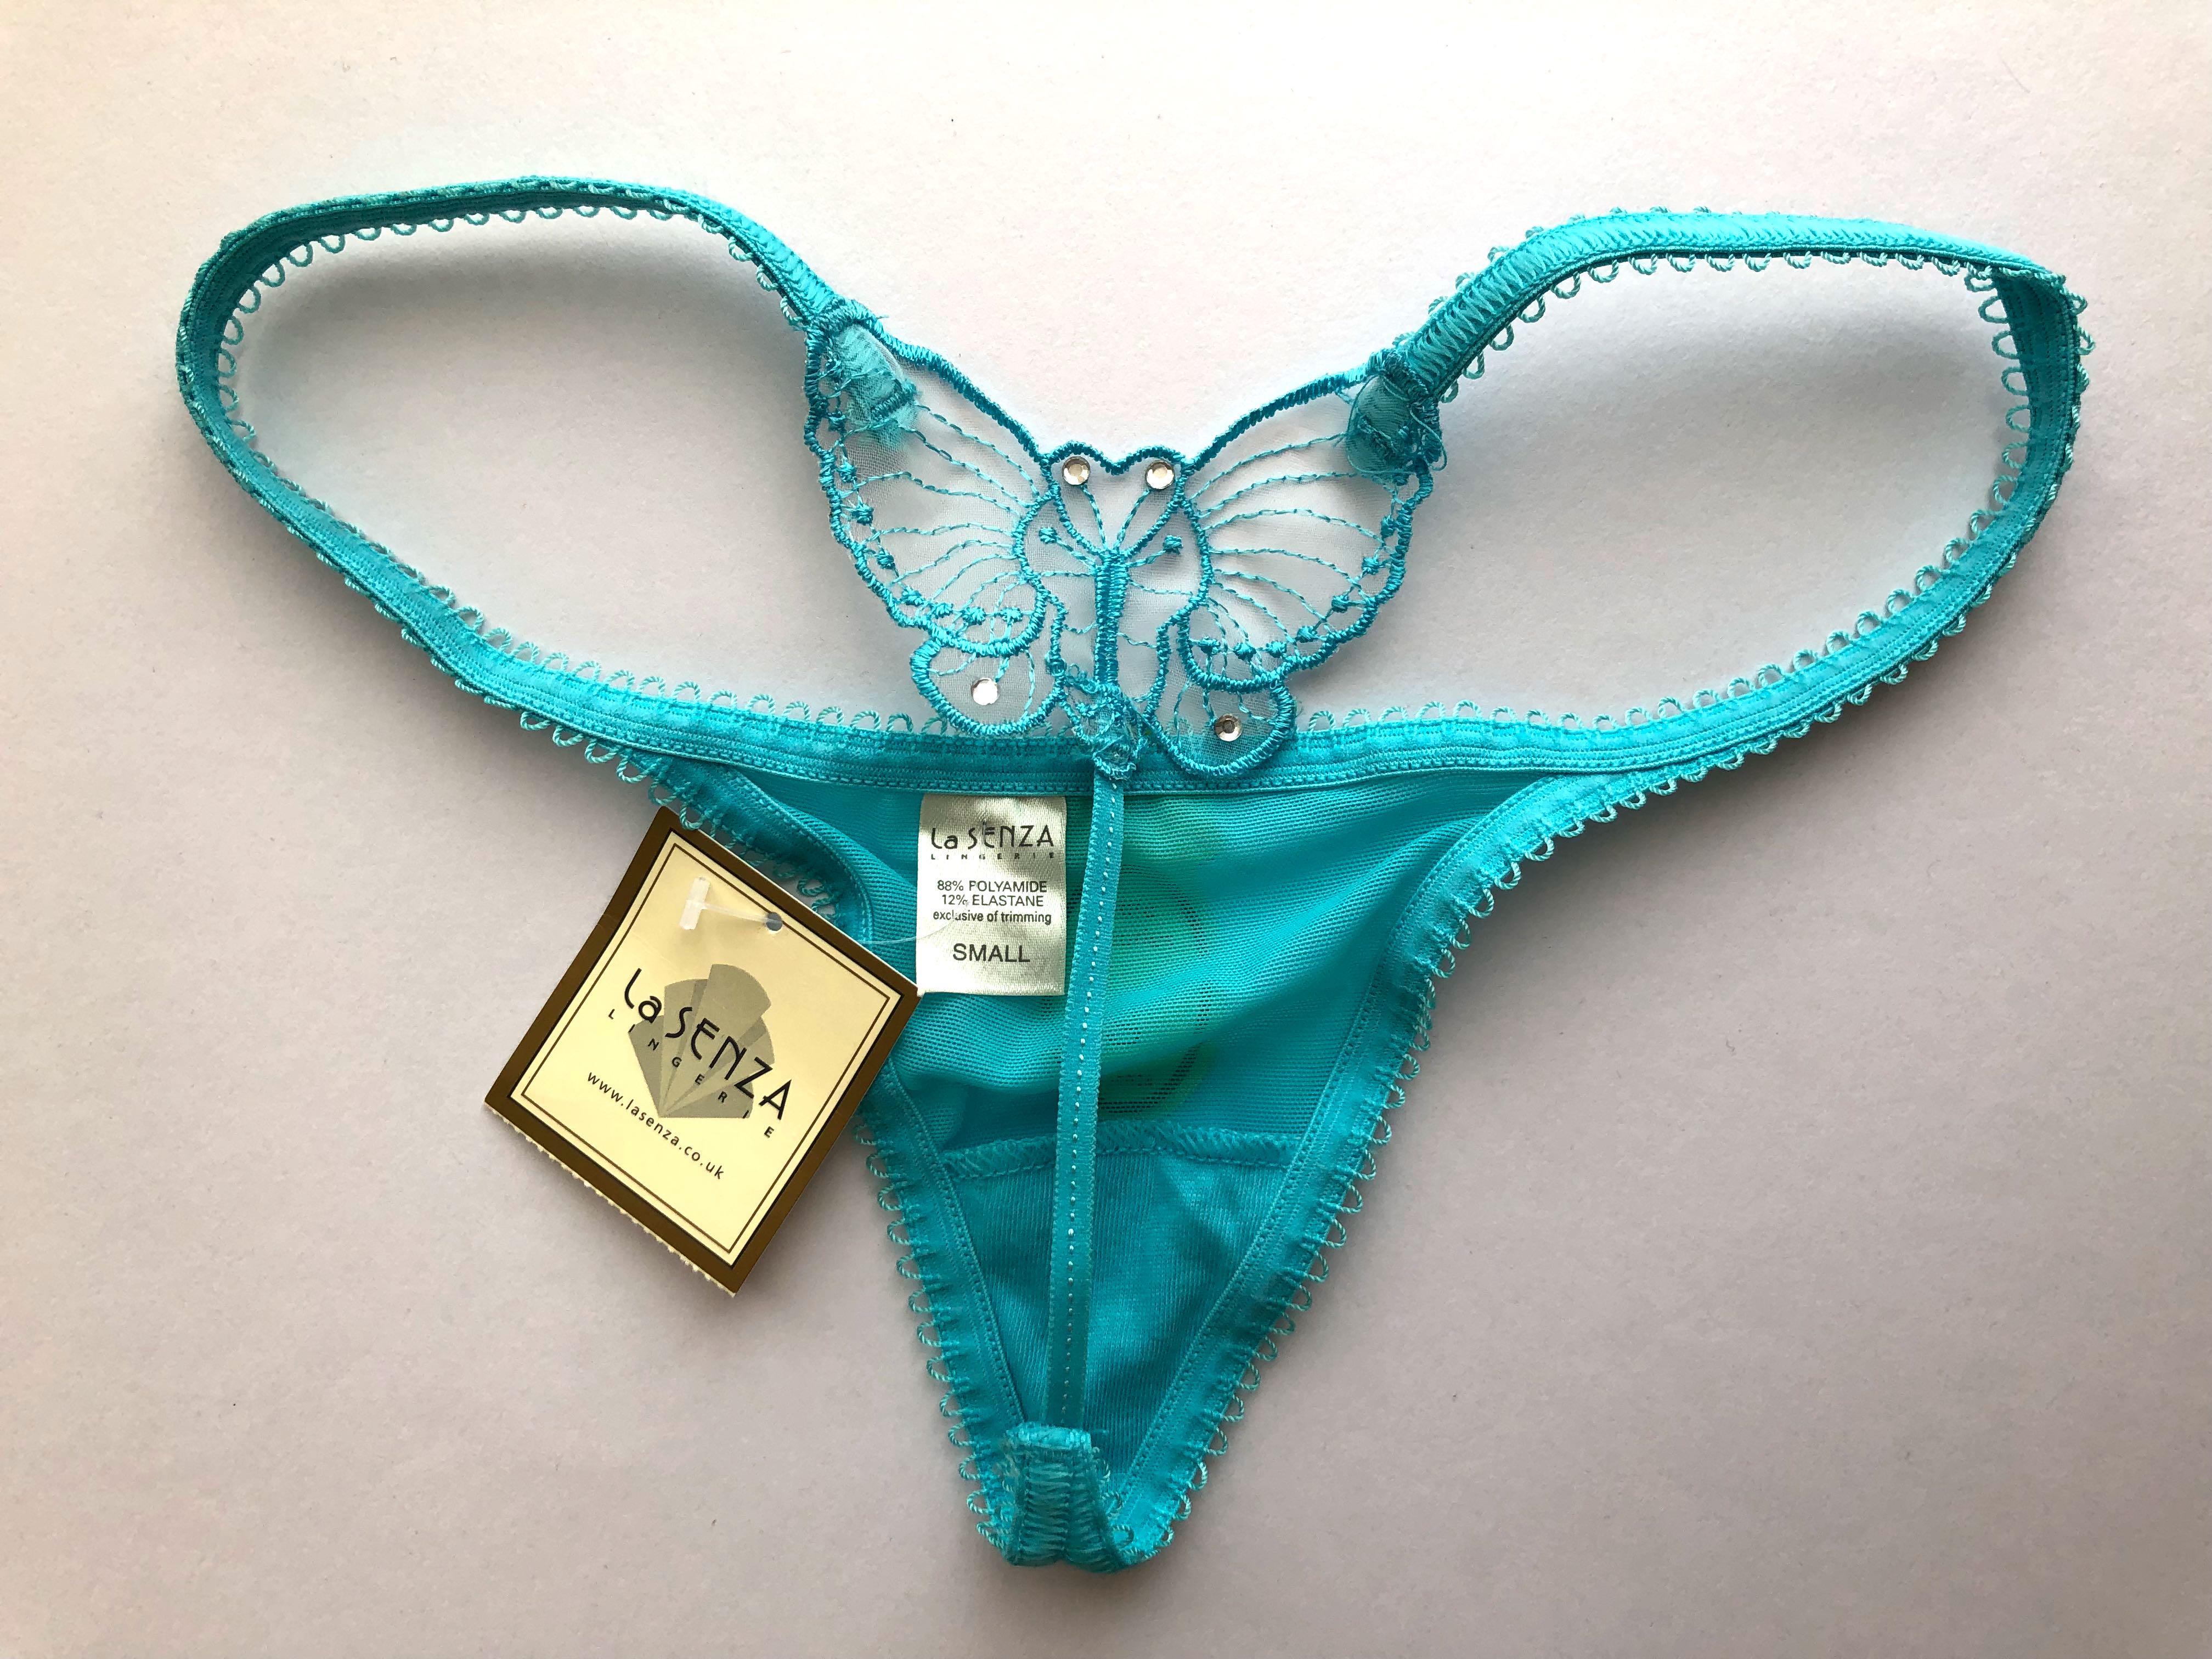 https://media.karousell.com/media/photos/products/2018/07/29/la_senza_turquoise_butterfly_thong_1532836349_af62a065_progressive.jpg